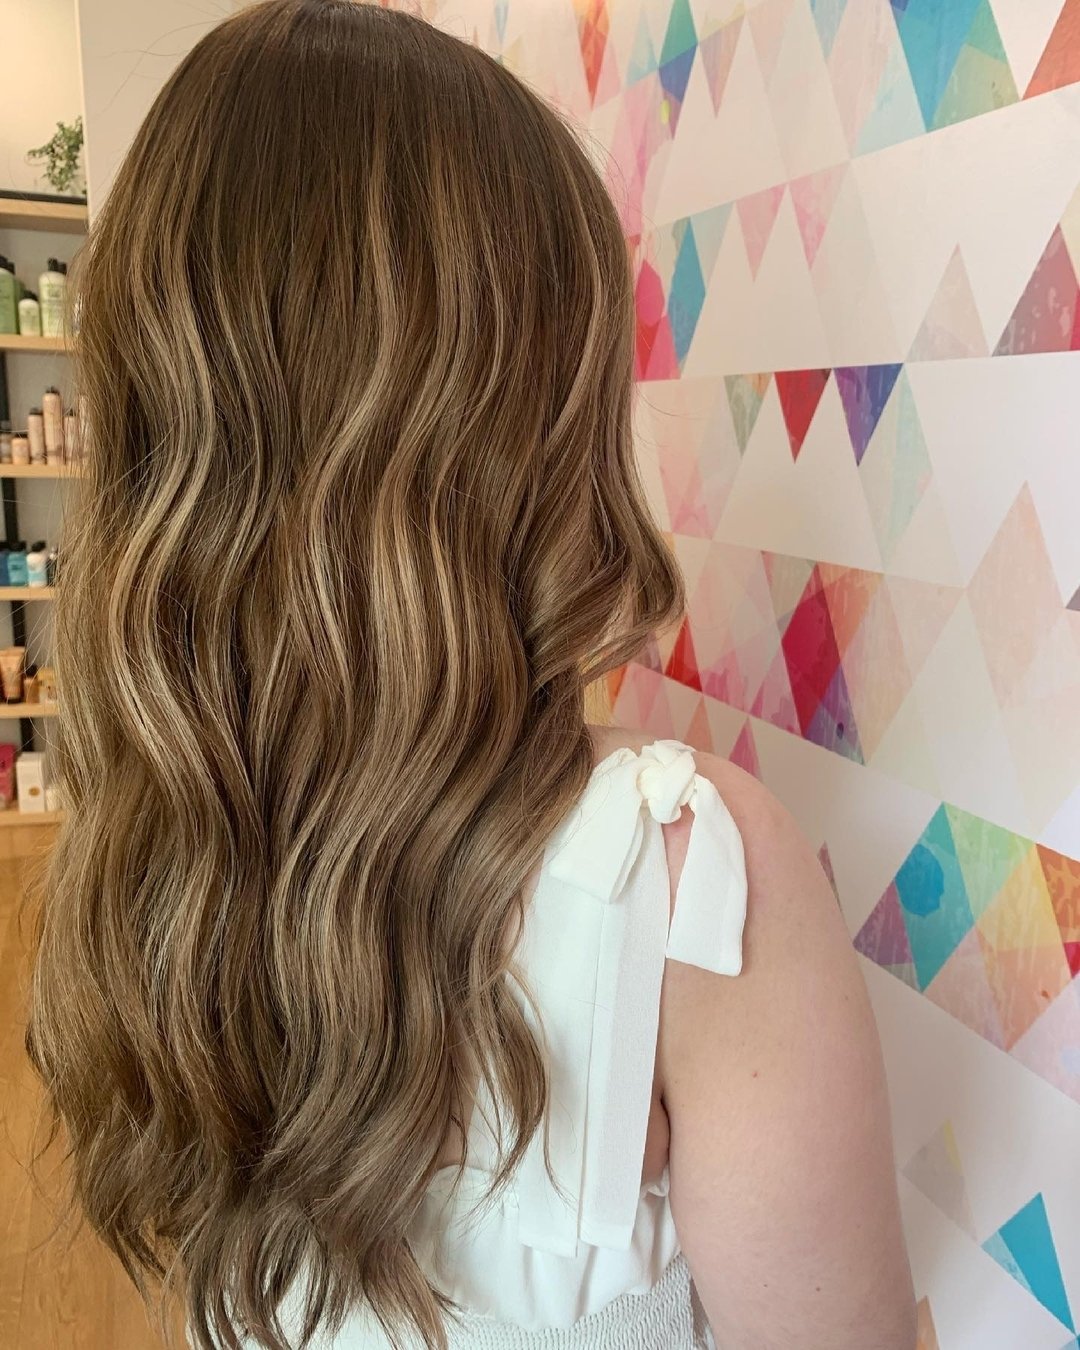 Dime Sophie went from blonde to bronde in this sitting. 

Styled with Bumble and bumble Hairdressers Invisible Oil Primer, Grooming cream, Heat Shield Blow Dry Accelerator, and Thickening Go Big Treatment. 

#dimelife #feelinlikeadime #bumbleandbumbl